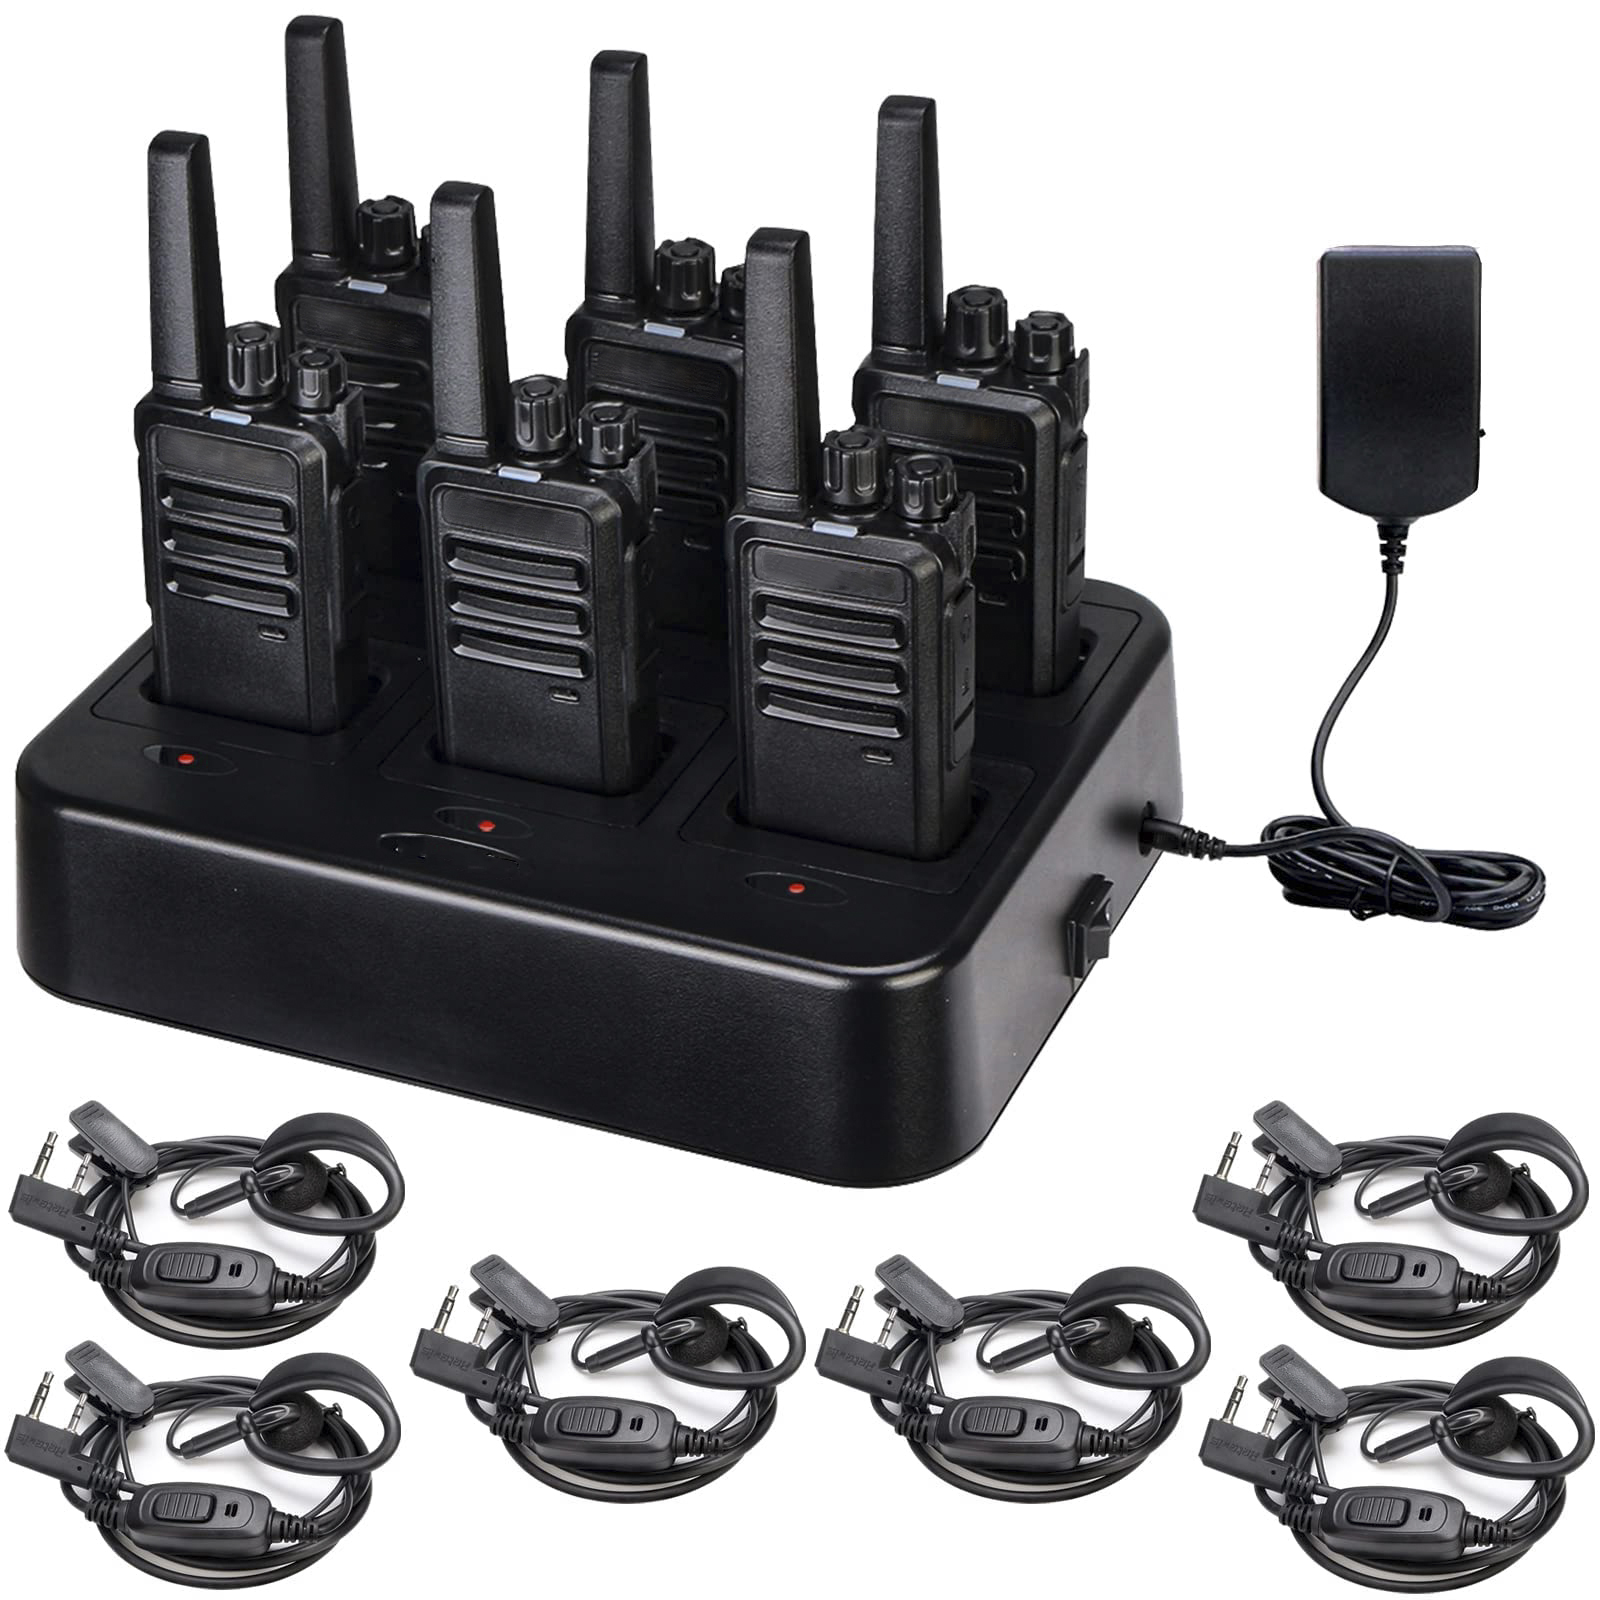 Walkie Talkies with Earpiece, Portable FRS Two-Way Radios Rechargeable, with 6 Way Multi Unit Charger, Hands Free, Long Range, Rugged 2 Way Radios 6 Pack for Adults School Church-OXIMETERBUY